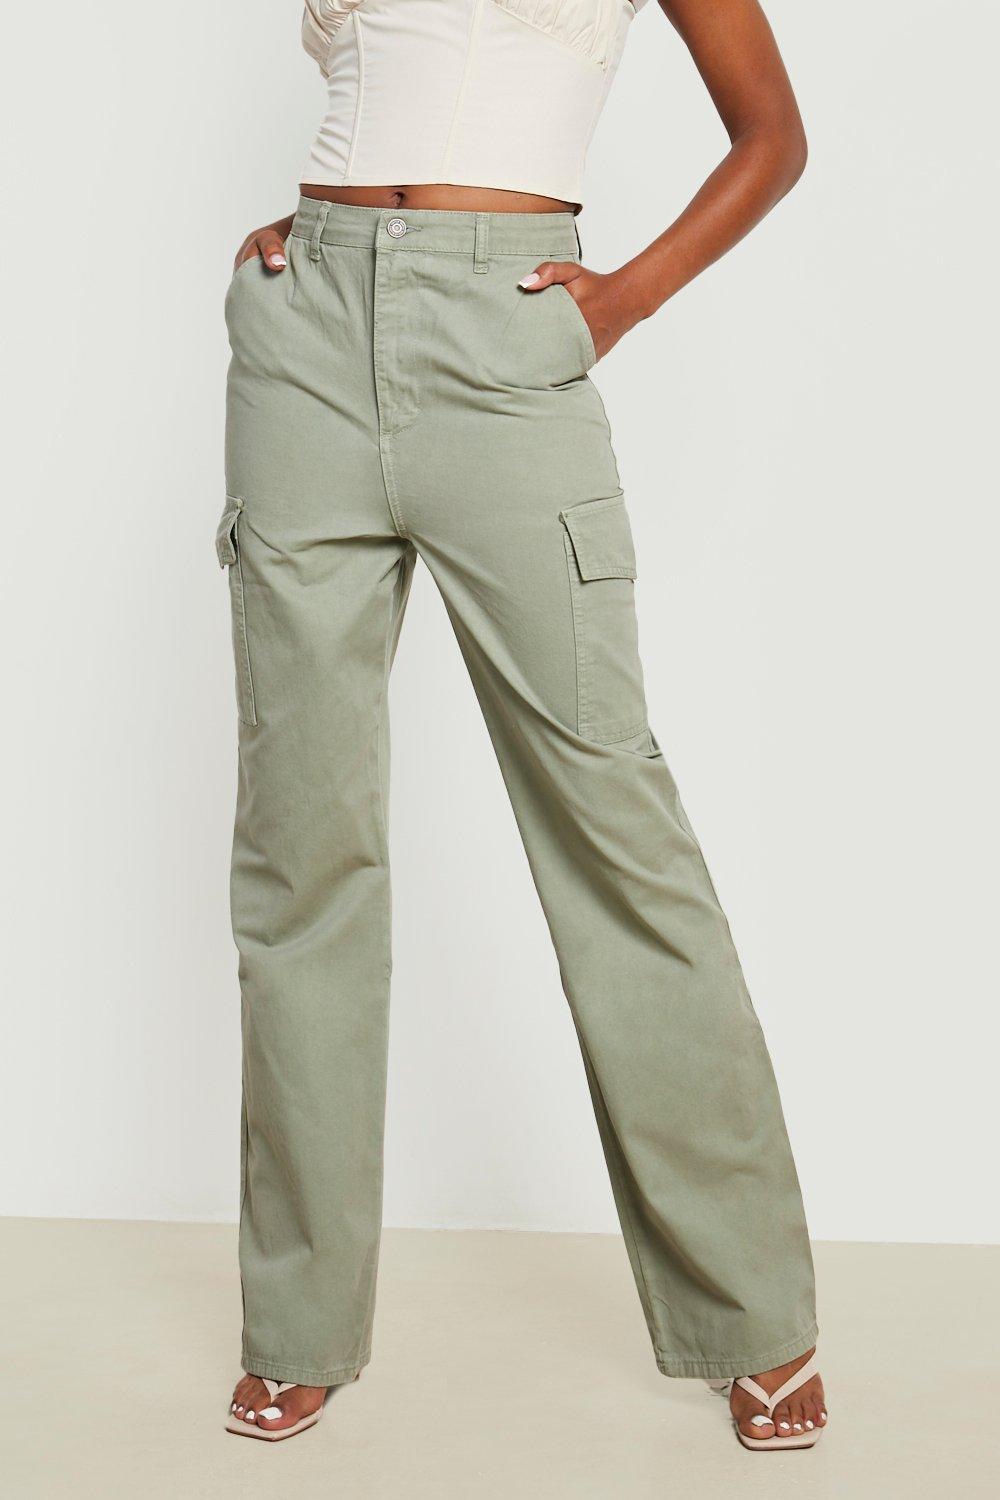 Slacks and Chinos Cargo trousers Boohoo Denim Tall Detachable Pocket And Leg Cargo Pants in Grey Womens Clothing Trousers Grey 